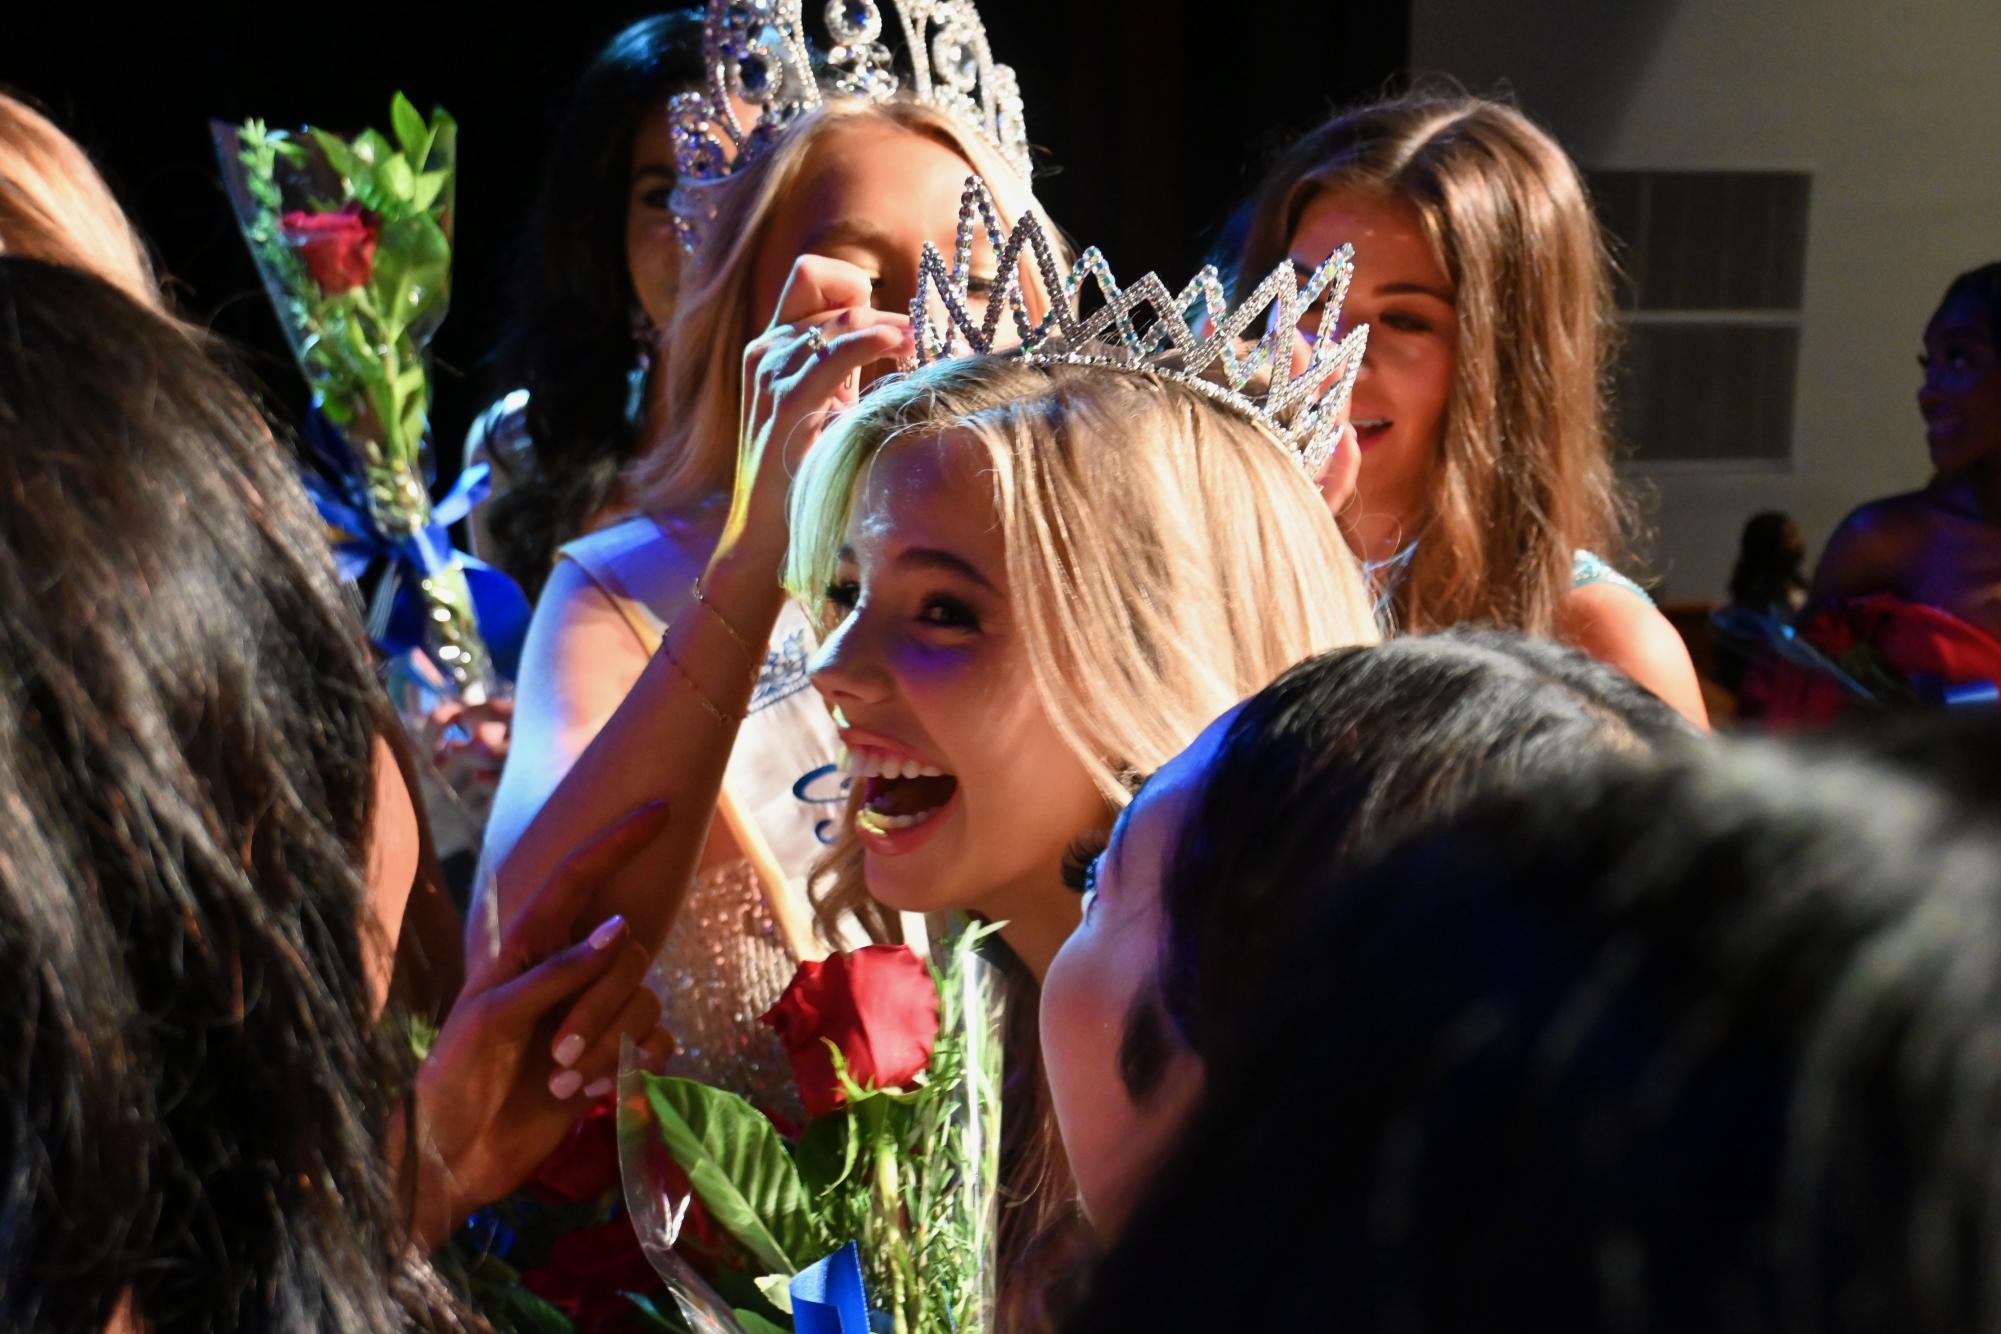 Kipping named most beautiful in OHS Parade of Beauties